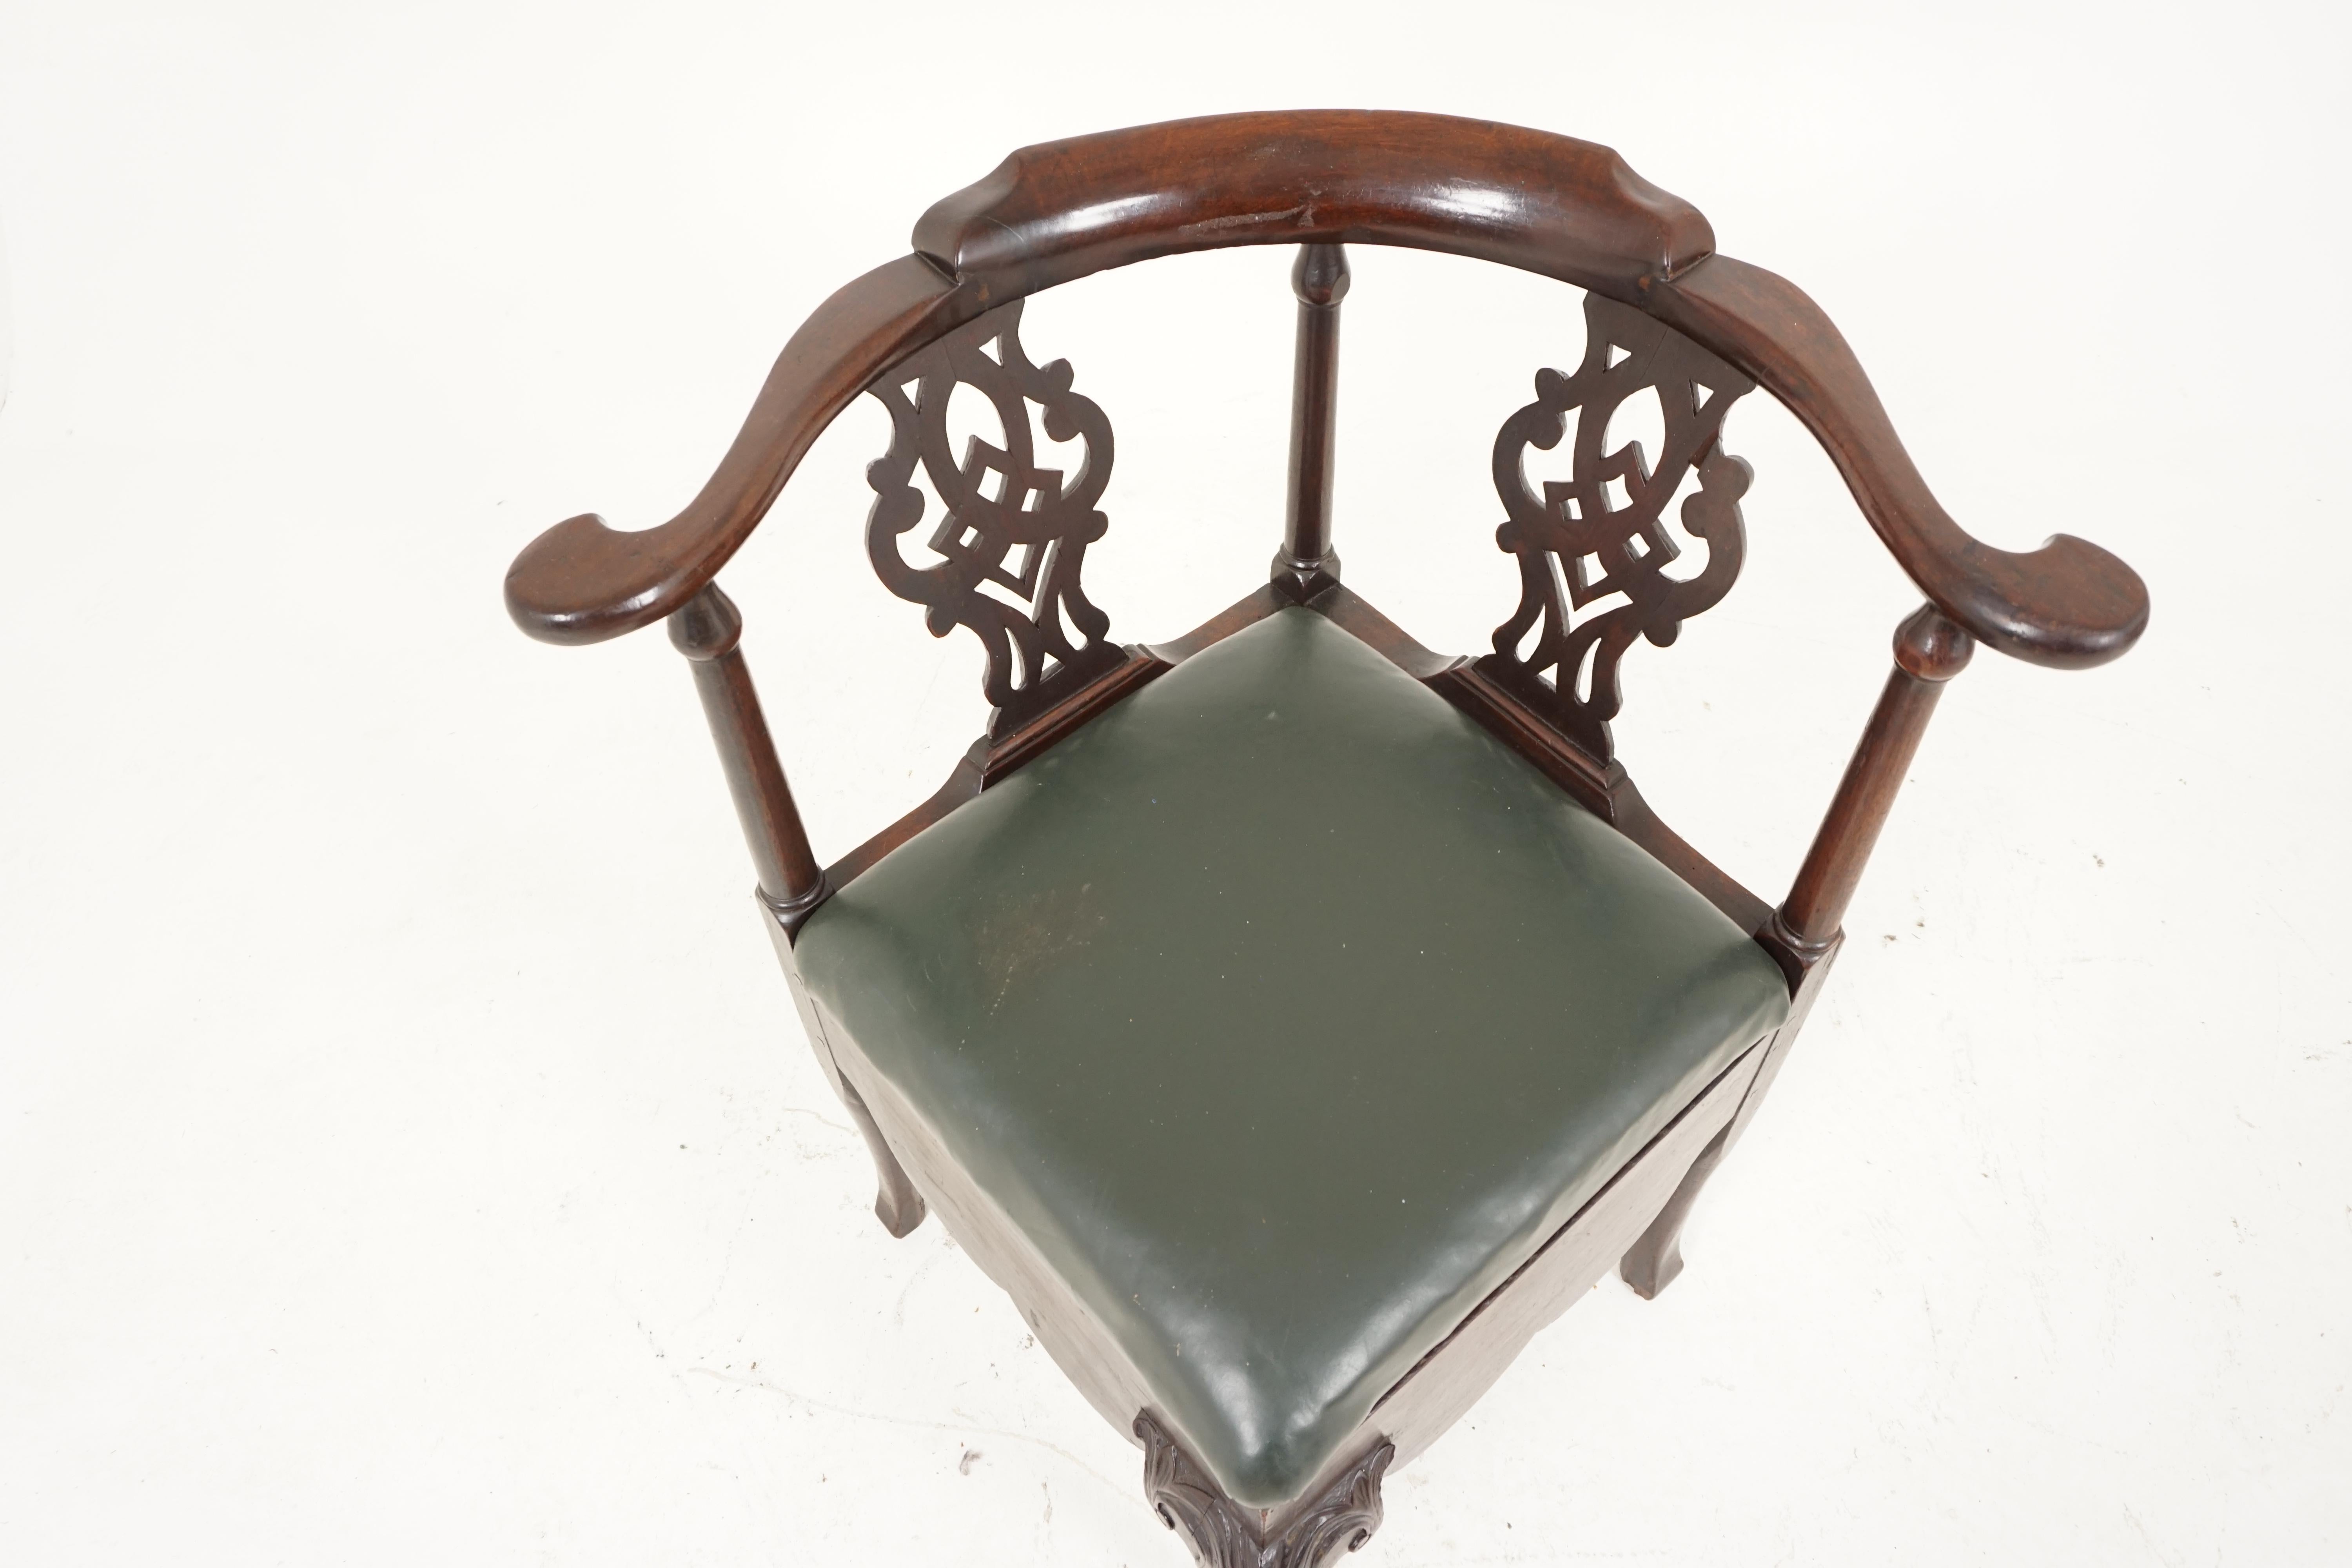 Antique corner chair, Victorian carved walnut chair, antique furniture, Scotland 1880, B2027

Scotland 1880
Solid walnut
Original finish
Shaped gallery back
Fretwork below
Upholstered green leather seat
Standing on carved ball and claw foot